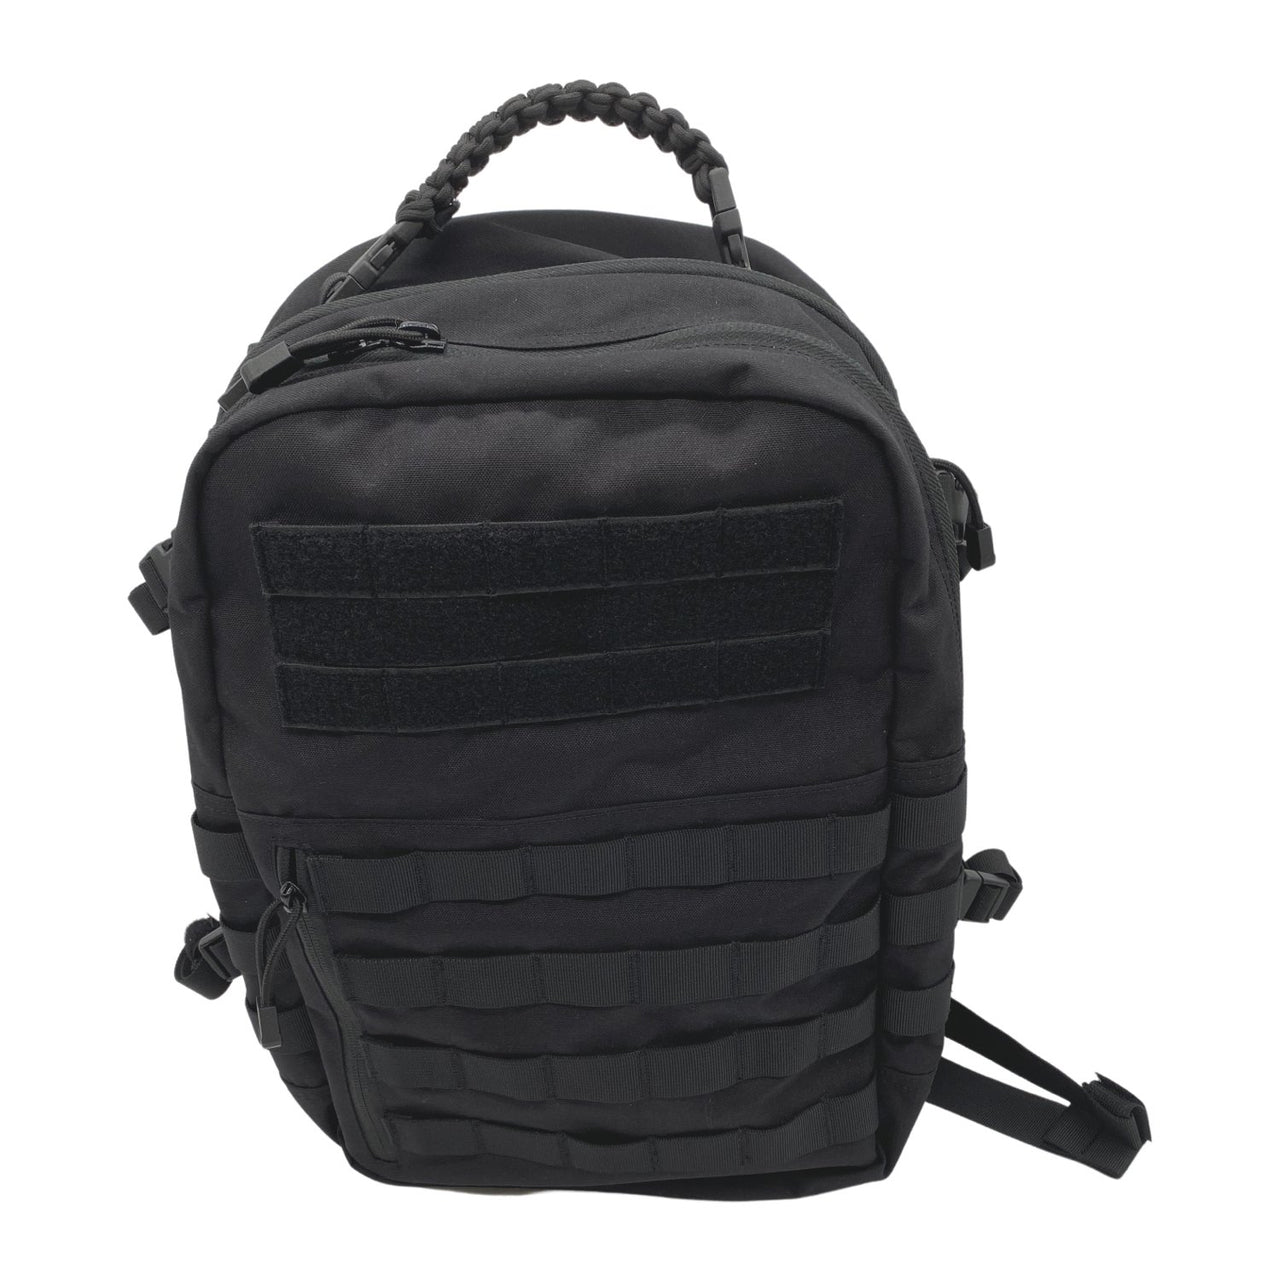 Body Armor Direct Tactical Backpack Enhanced Multi-Threat with molle webbing and multiple compartments, isolated on a white background.